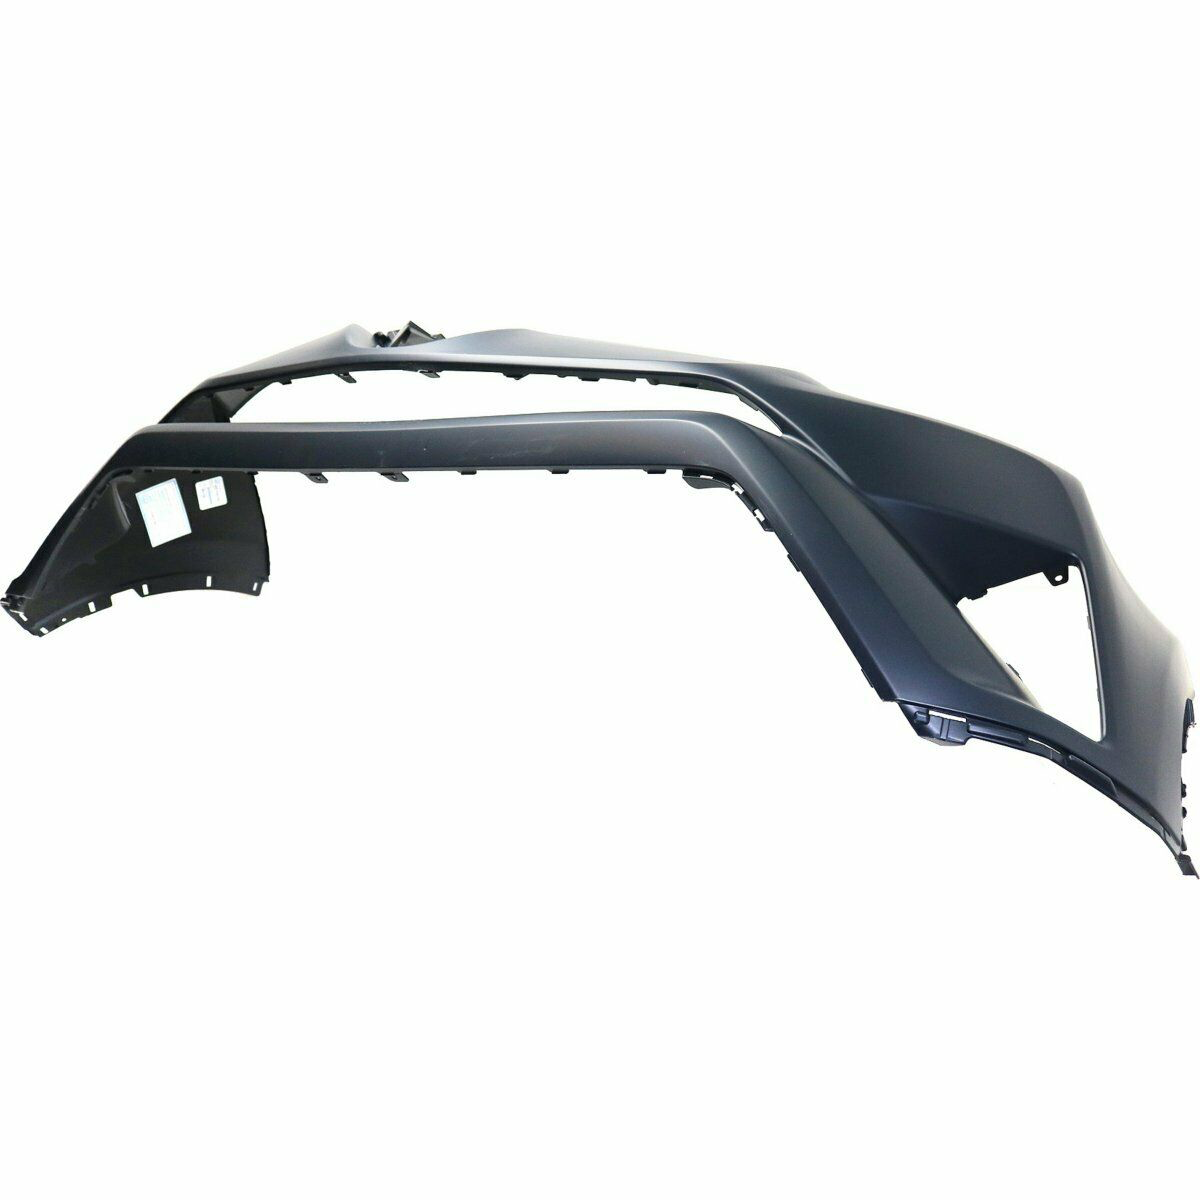 2016-2018 Toyota RAV4 Front Upper Bumper (USA made models) Painted to Match